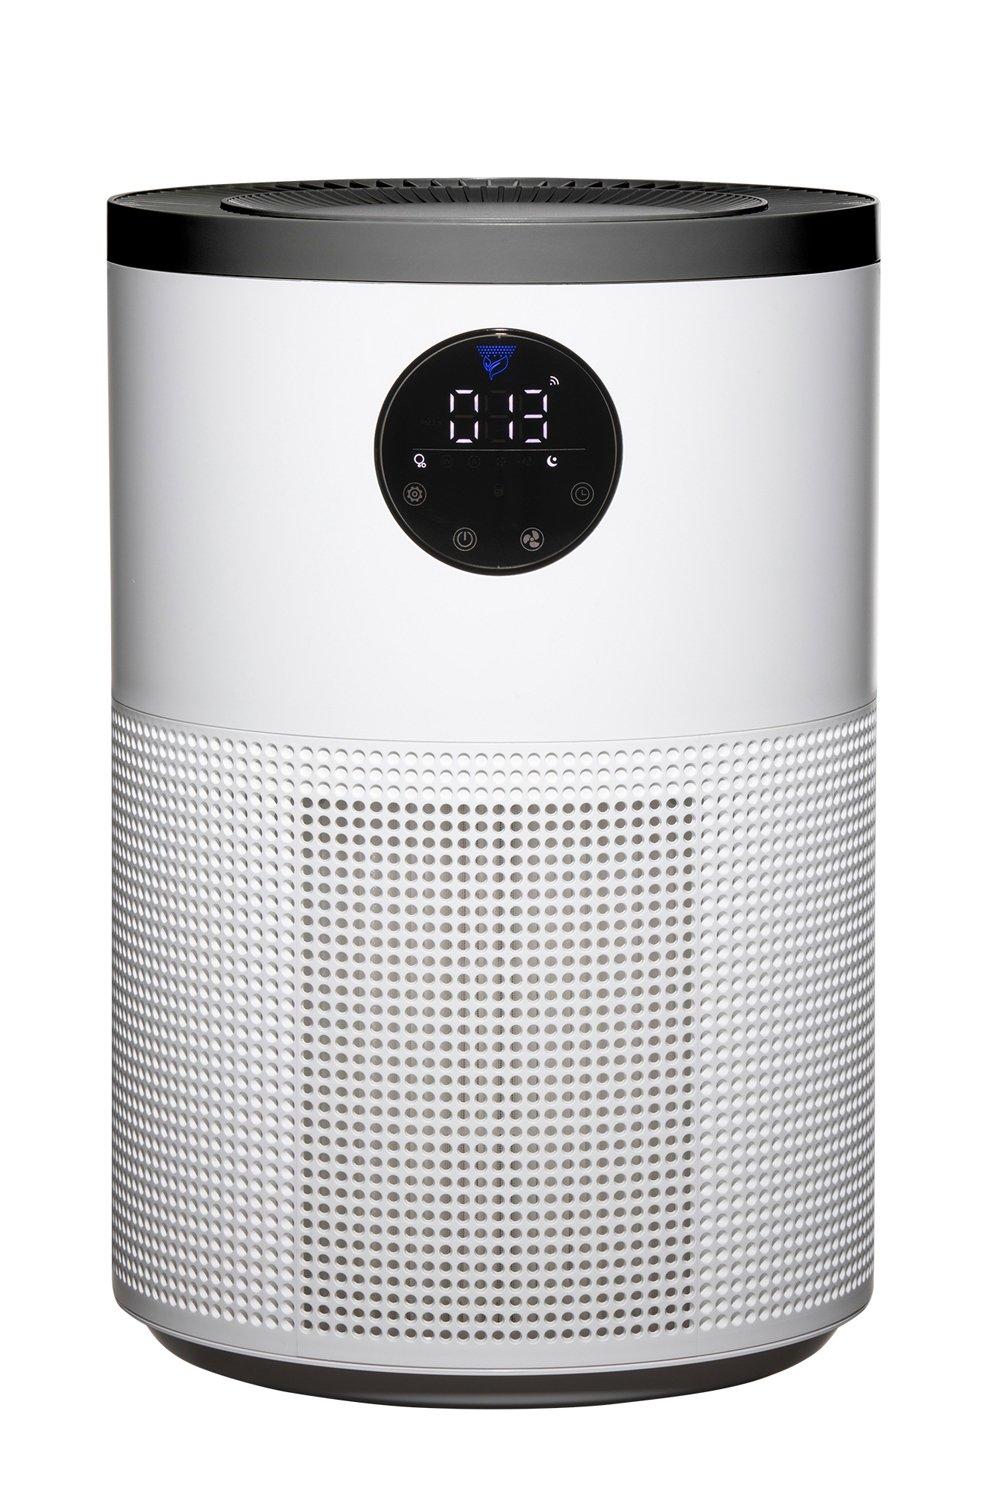 Air Purifier with WiFi Control Portable Allergy Relief HEPA Filter